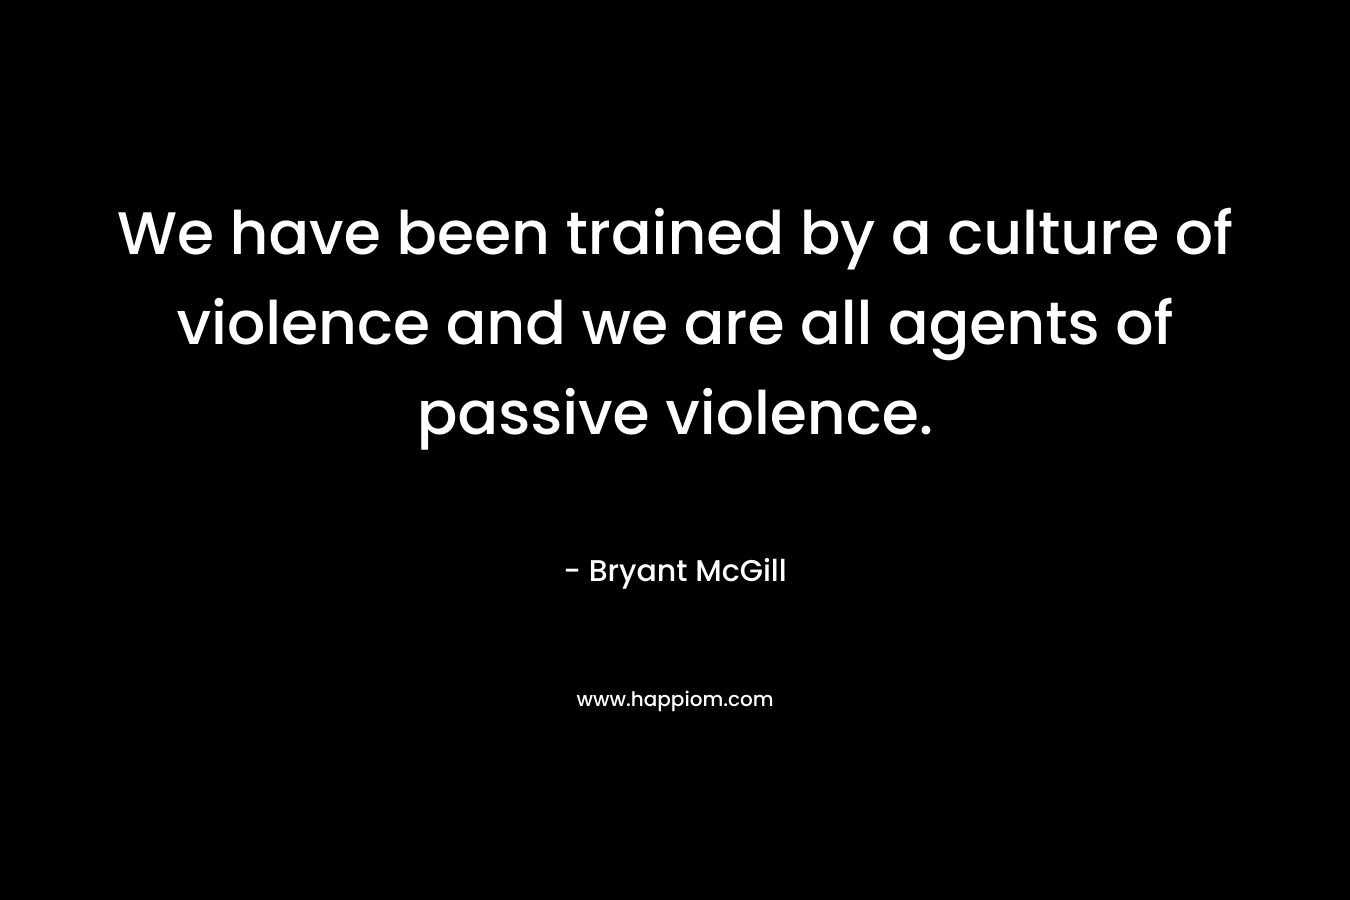 We have been trained by a culture of violence and we are all agents of passive violence. – Bryant McGill